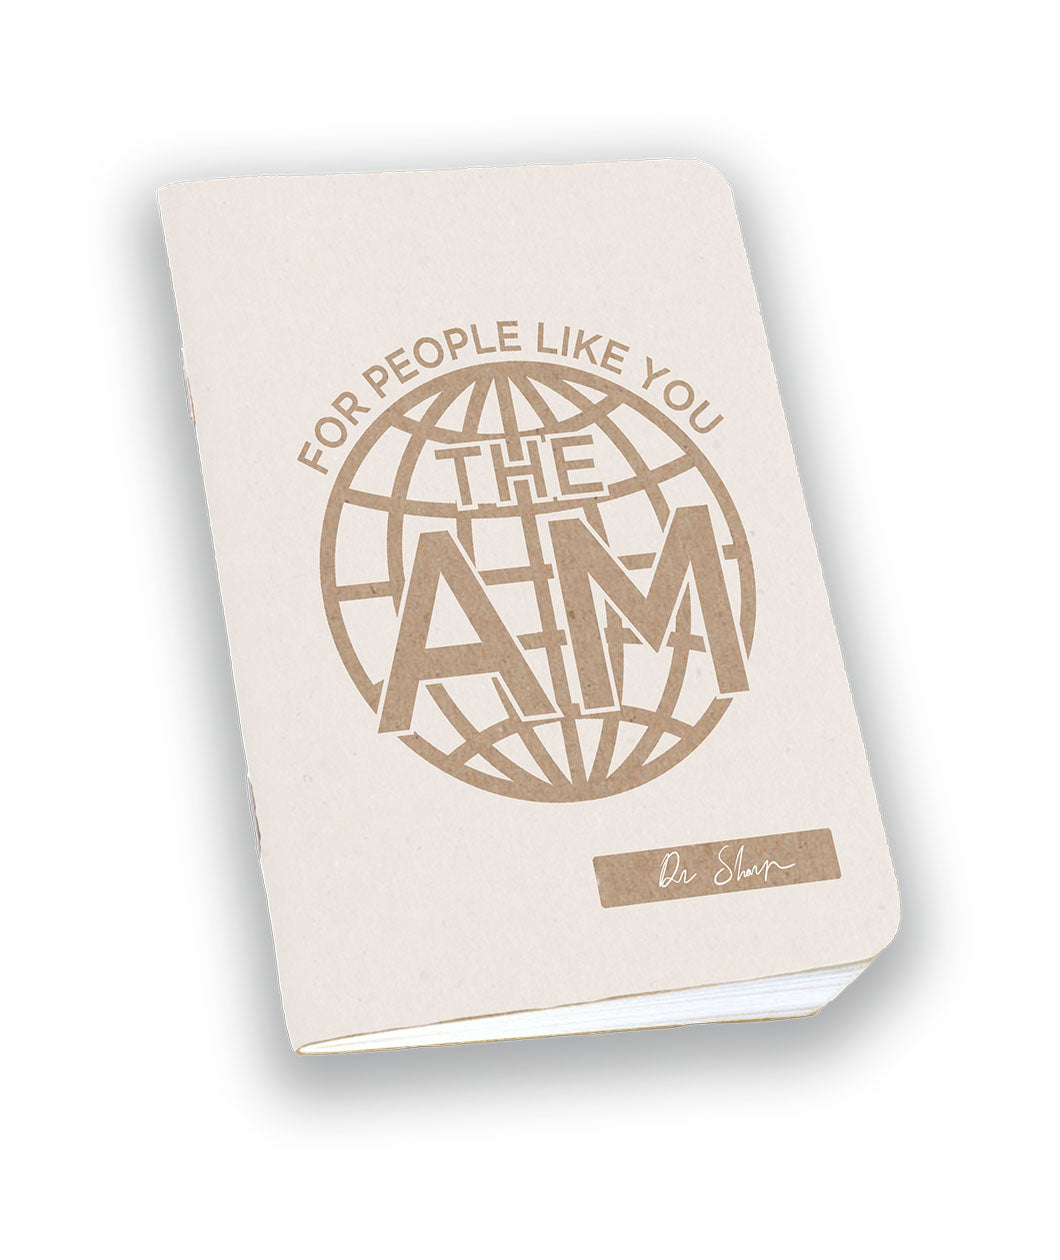 A beige field notebook with a circle in the middle and the text "The AM". Above the circle is the text "For People Like You". A small tag on the bottom right reads "Dr Sharp". From the Bright Sessions - AM Archives. 